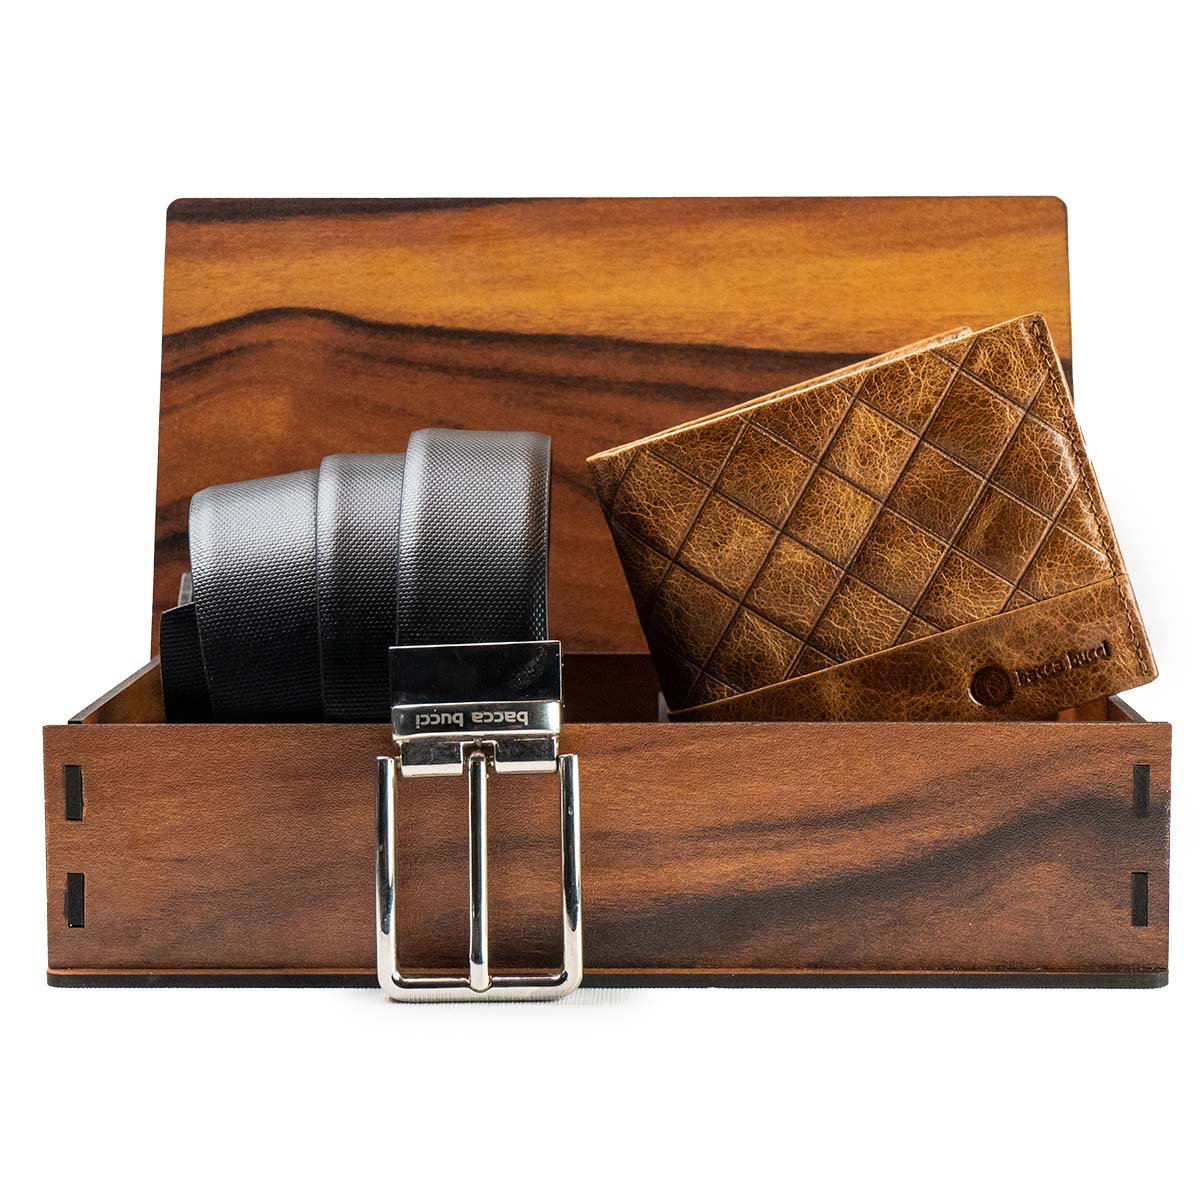 Buy URBAN FOREST Brian Black Leather Wallet & Black Casual Belt Combo Gift  Set for Men at Amazon.in